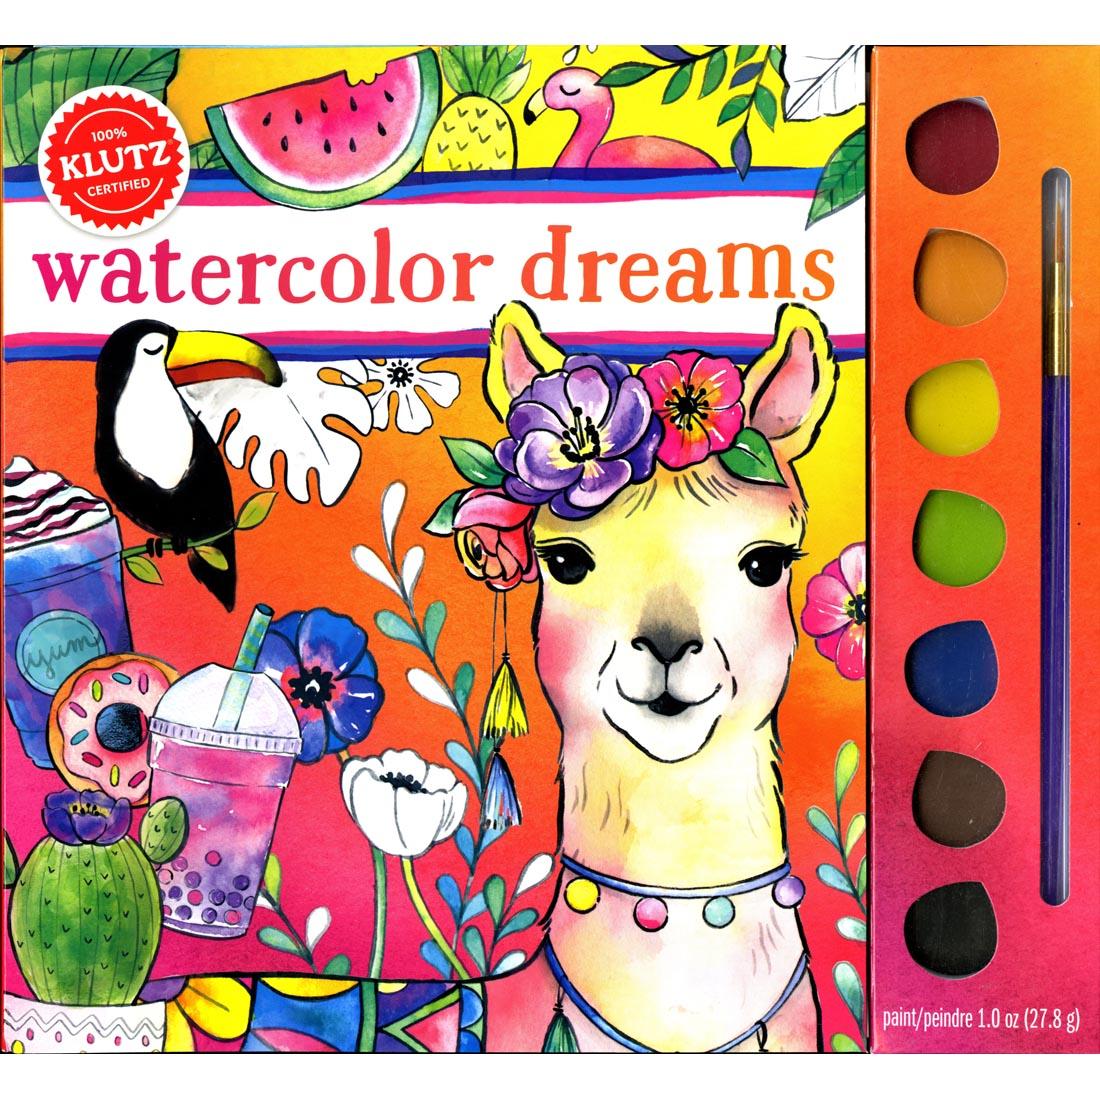 package shows a watercolor painting of a llama and includes a paintbrush and 7 colors of pan watercolors